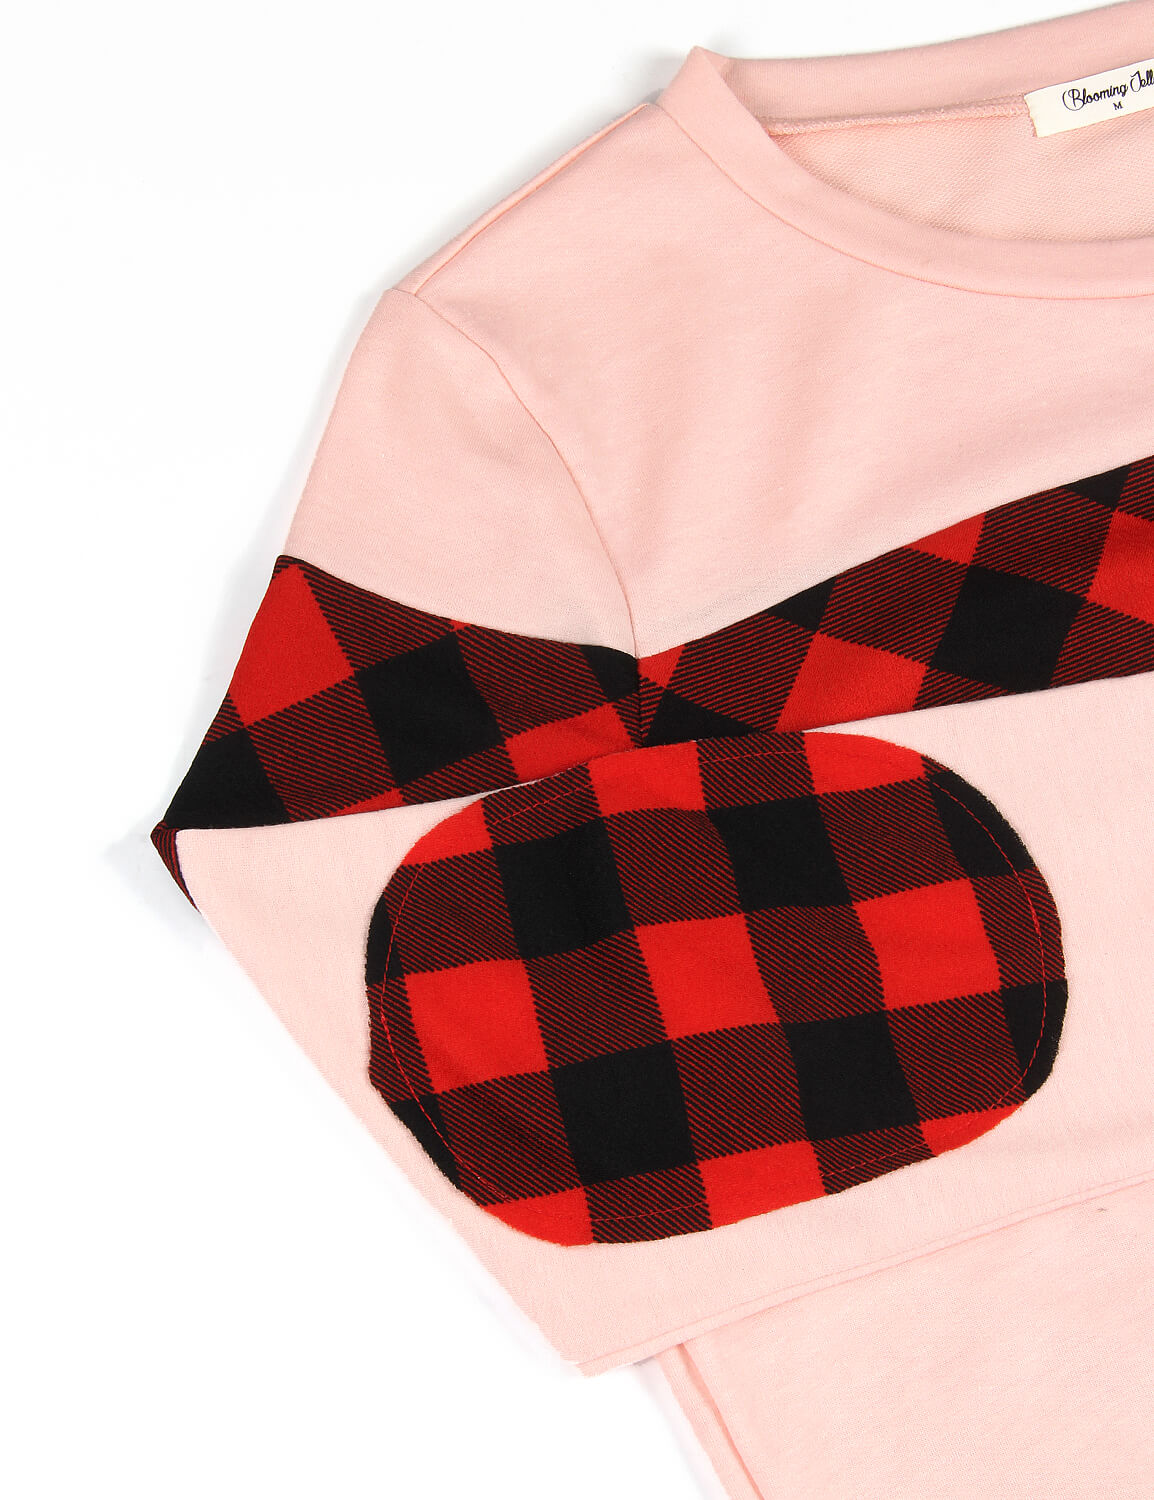 Checked Plaid Elbow Patched Sweatshirt